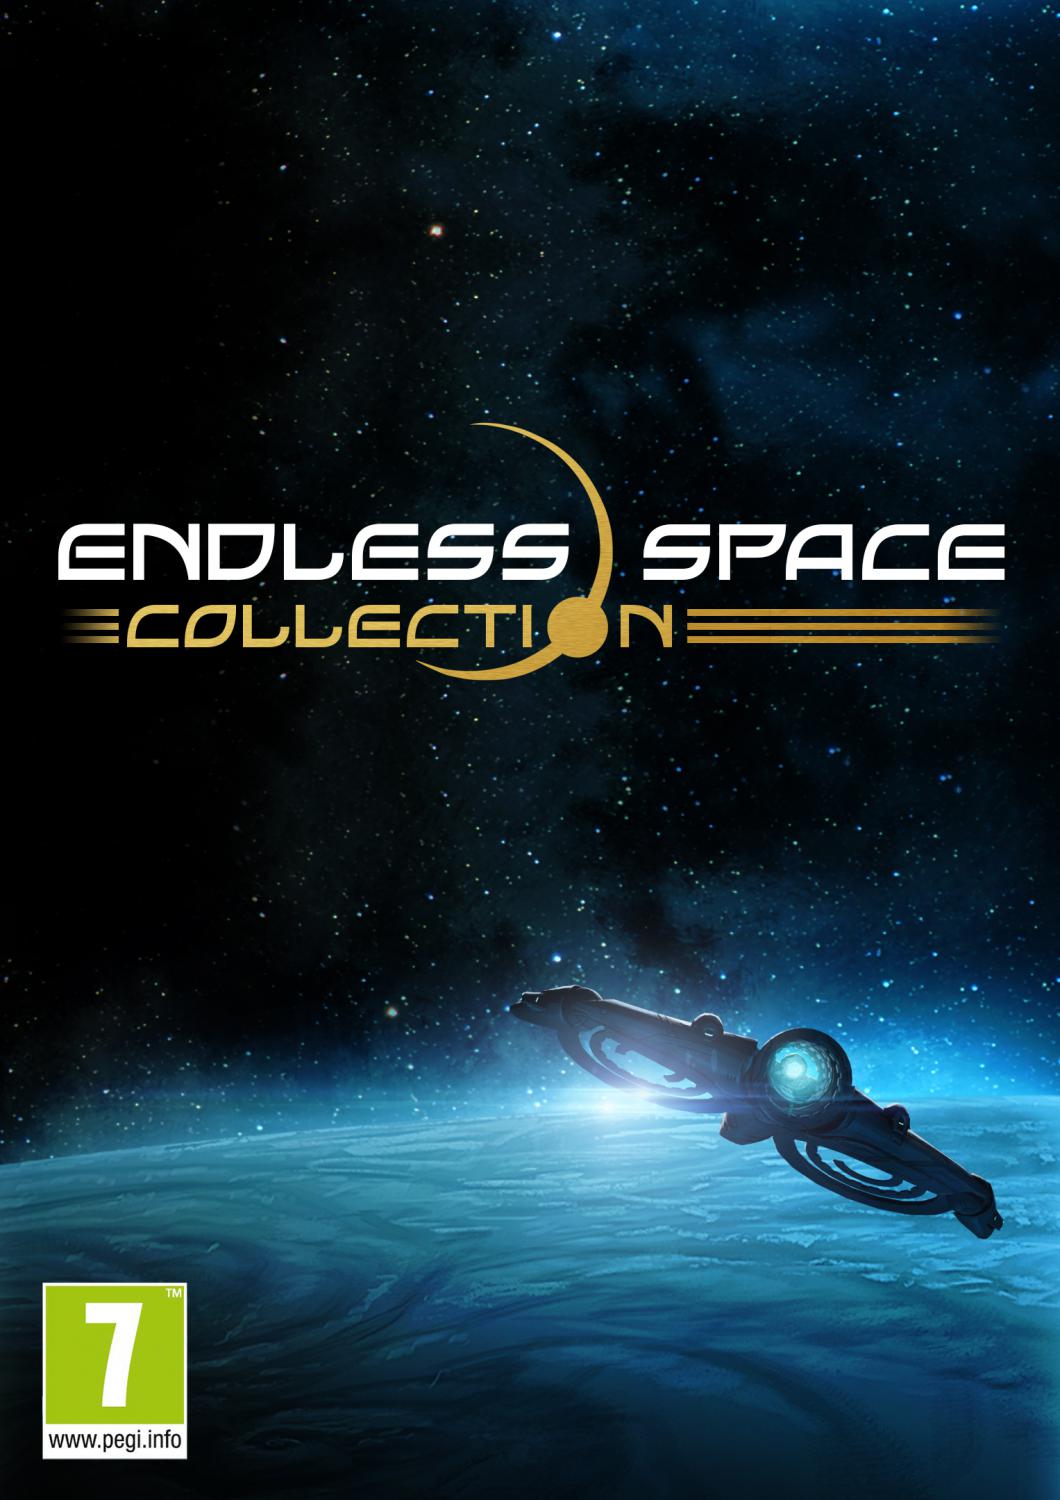 Is endless space on steam фото 64